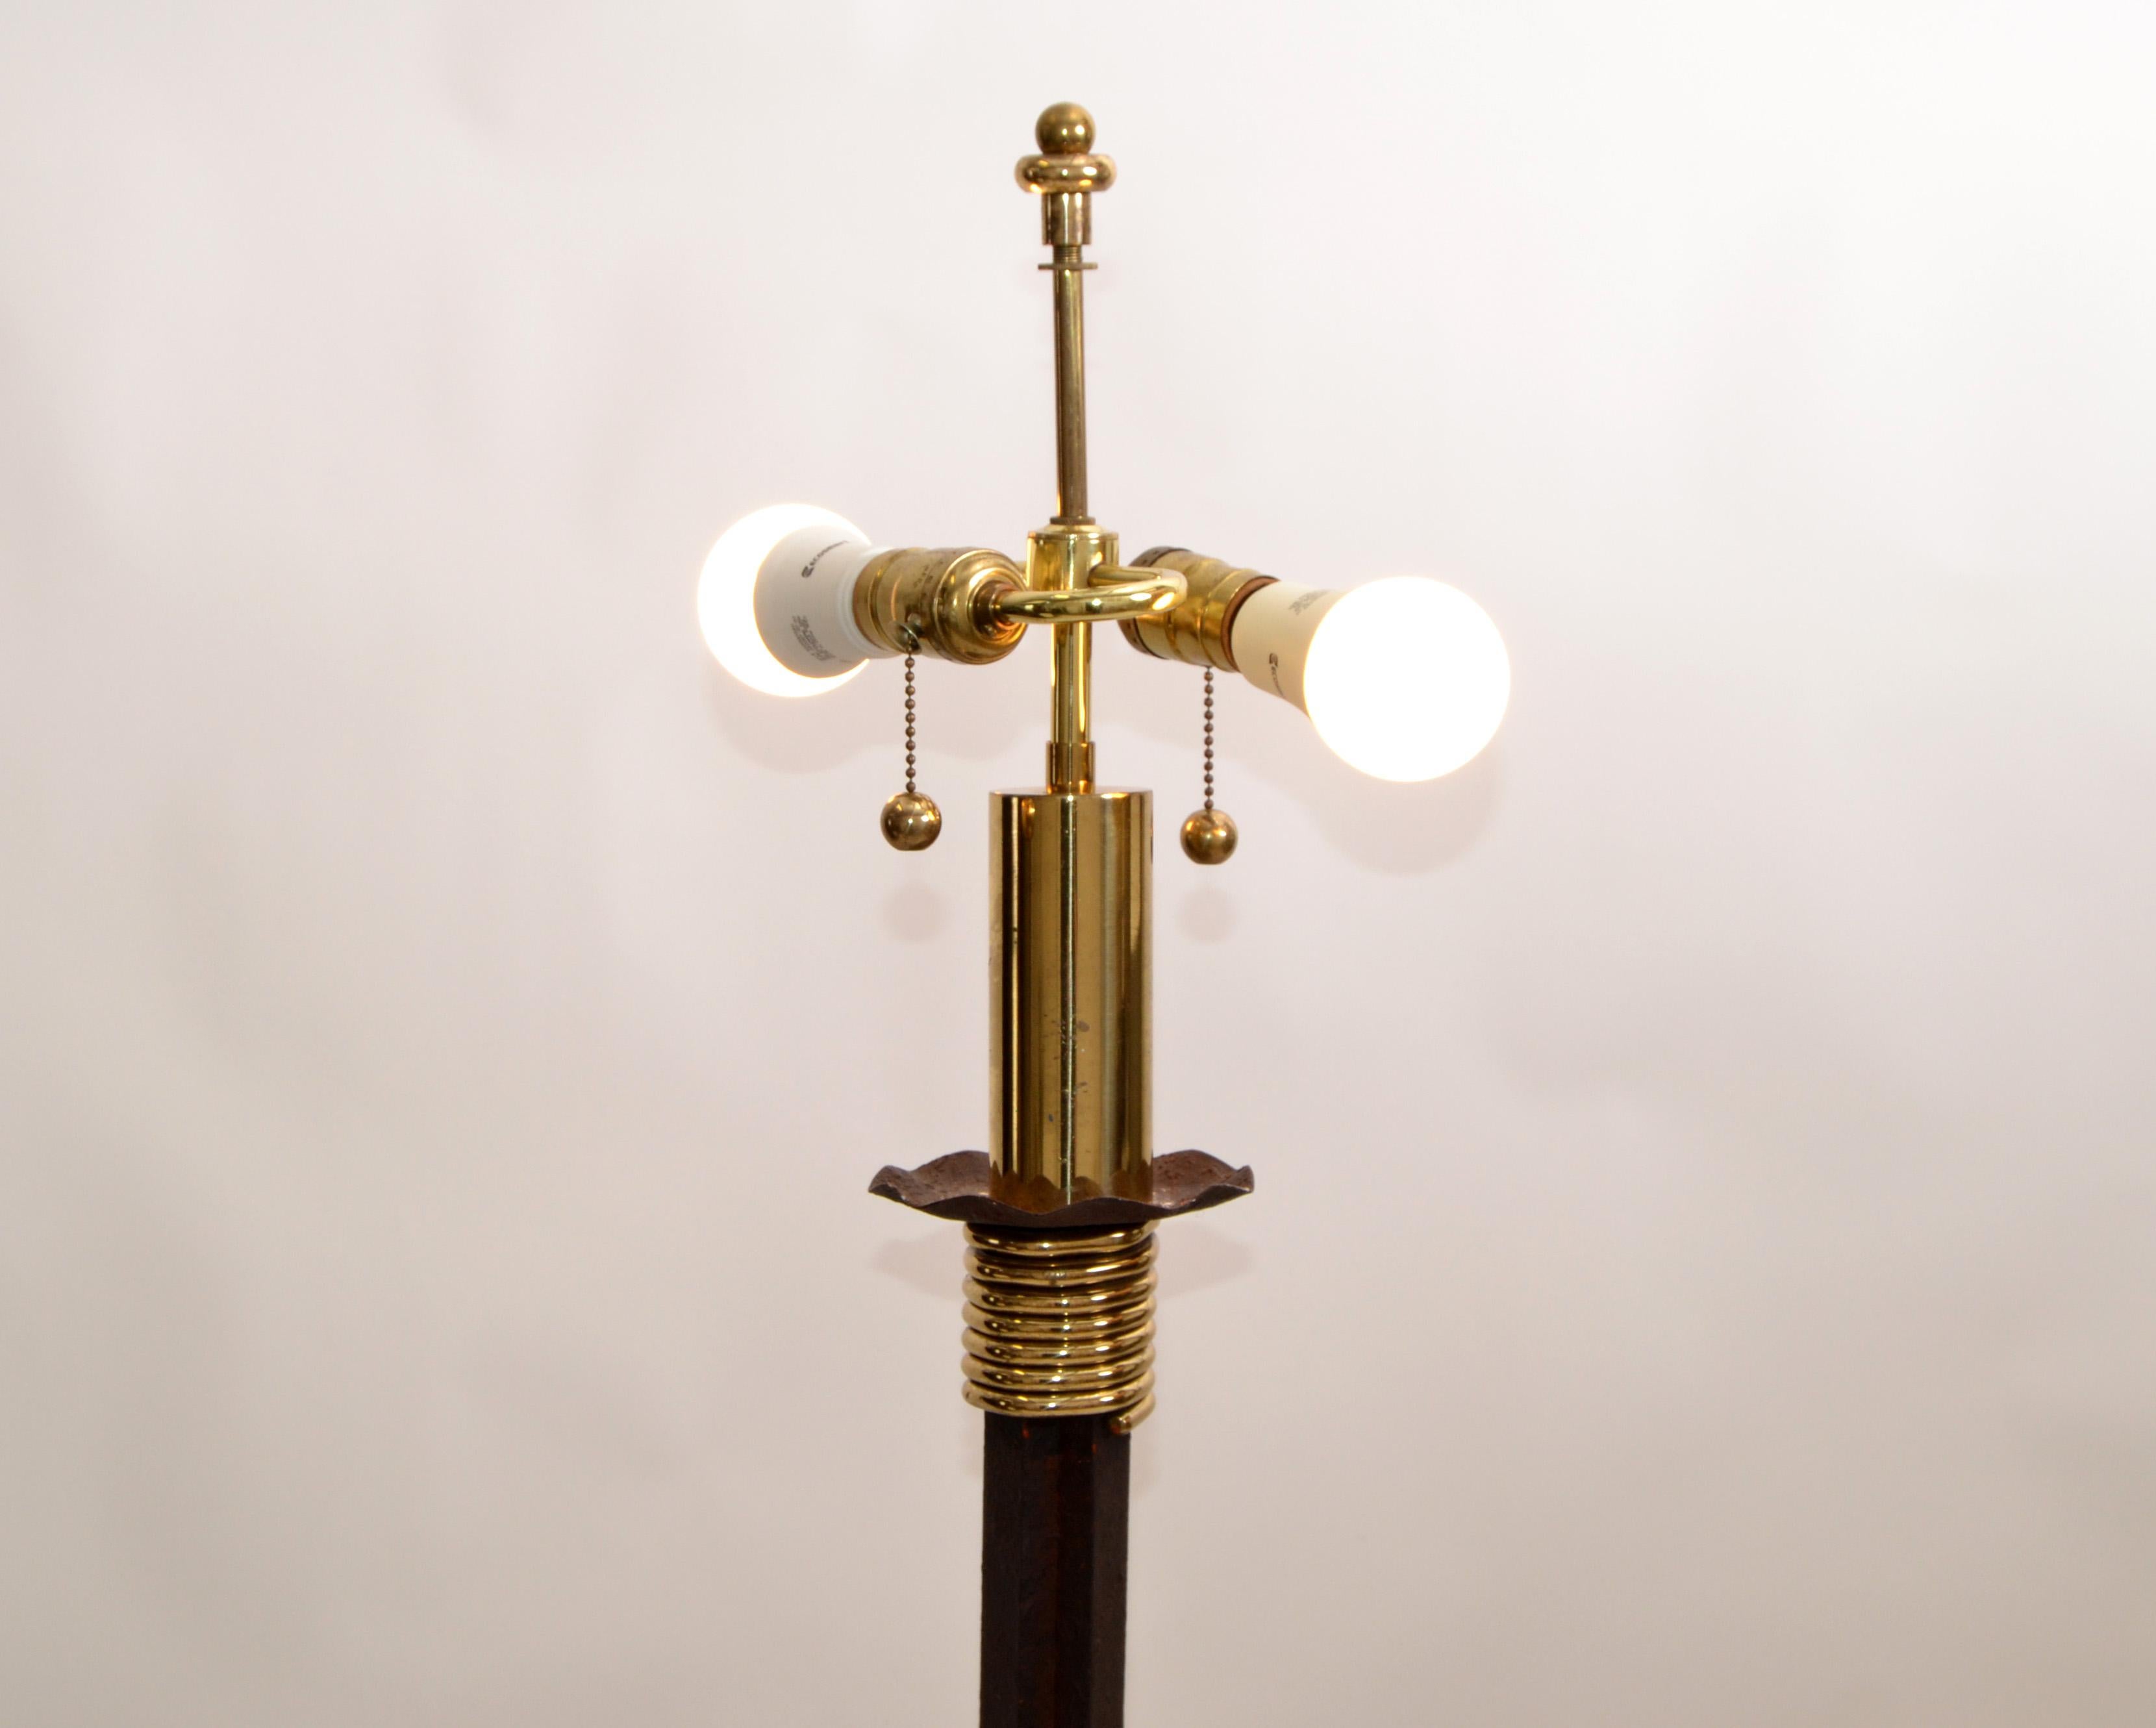 American Mid-Century Modern Brass & Handcrafted Cast Iron Floor Lamp on Tripod Base 1970s For Sale